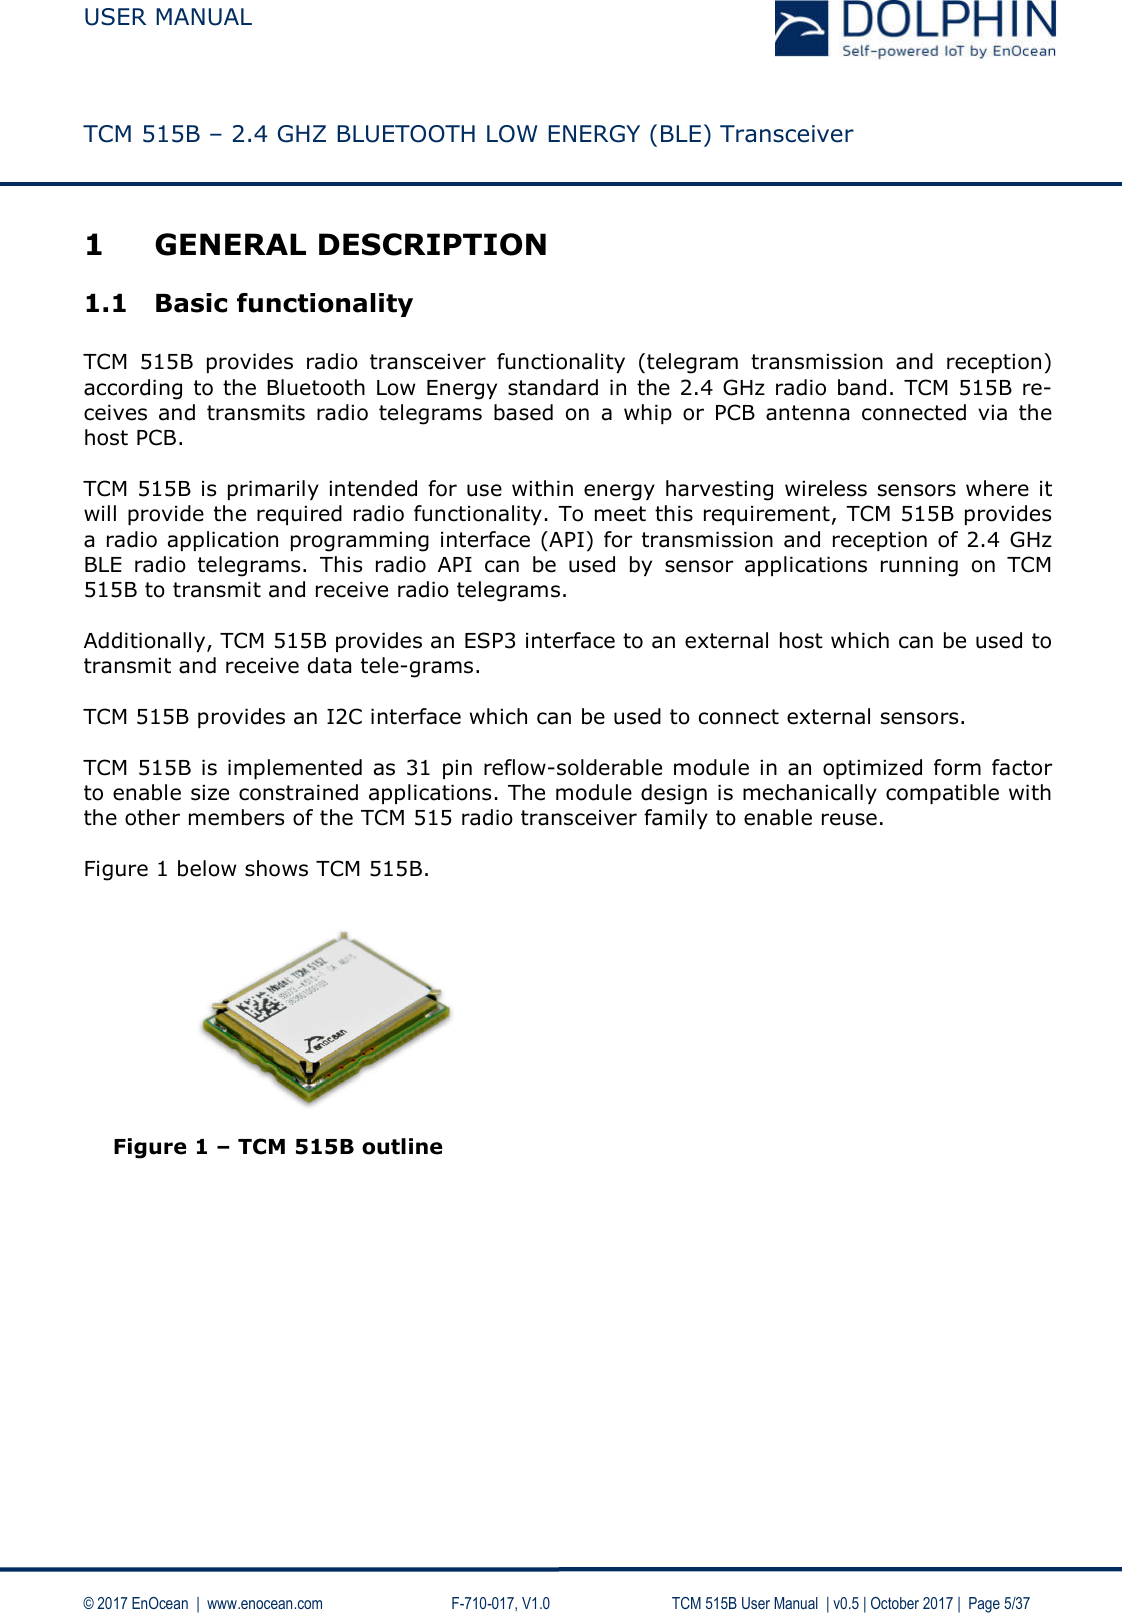  USER MANUAL    TCM 515B – 2.4 GHZ BLUETOOTH LOW ENERGY (BLE) Transceiver   © 2017 EnOcean  |  www.enocean.com     F-710-017, V1.0        TCM 515B User Manual  | v0.5 | October 2017 |  Page 5/37 1 GENERAL DESCRIPTION 1.1 Basic functionality  TCM  515B  provides  radio  transceiver  functionality  (telegram  transmission  and  reception) according to the Bluetooth Low Energy standard in the 2.4 GHz radio band. TCM 515B re-ceives  and  transmits  radio telegrams based on a  whip  or  PCB  antenna  connected  via the host PCB.  TCM 515B is primarily intended for use within energy harvesting wireless sensors where it will provide the required radio functionality. To meet this requirement, TCM 515B provides a radio application programming interface (API) for transmission and reception of 2.4 GHz BLE  radio  telegrams.  This  radio  API  can  be  used  by  sensor  applications  running  on  TCM 515B to transmit and receive radio telegrams.   Additionally, TCM 515B provides an ESP3 interface to an external host which can be used to transmit and receive data tele-grams.  TCM 515B provides an I2C interface which can be used to connect external sensors.   TCM 515B is implemented as 31 pin reflow-solderable module in an optimized form factor to enable size constrained applications. The module design is mechanically compatible with the other members of the TCM 515 radio transceiver family to enable reuse.  Figure 1 below shows TCM 515B.           Figure 1 – TCM 515B outline    